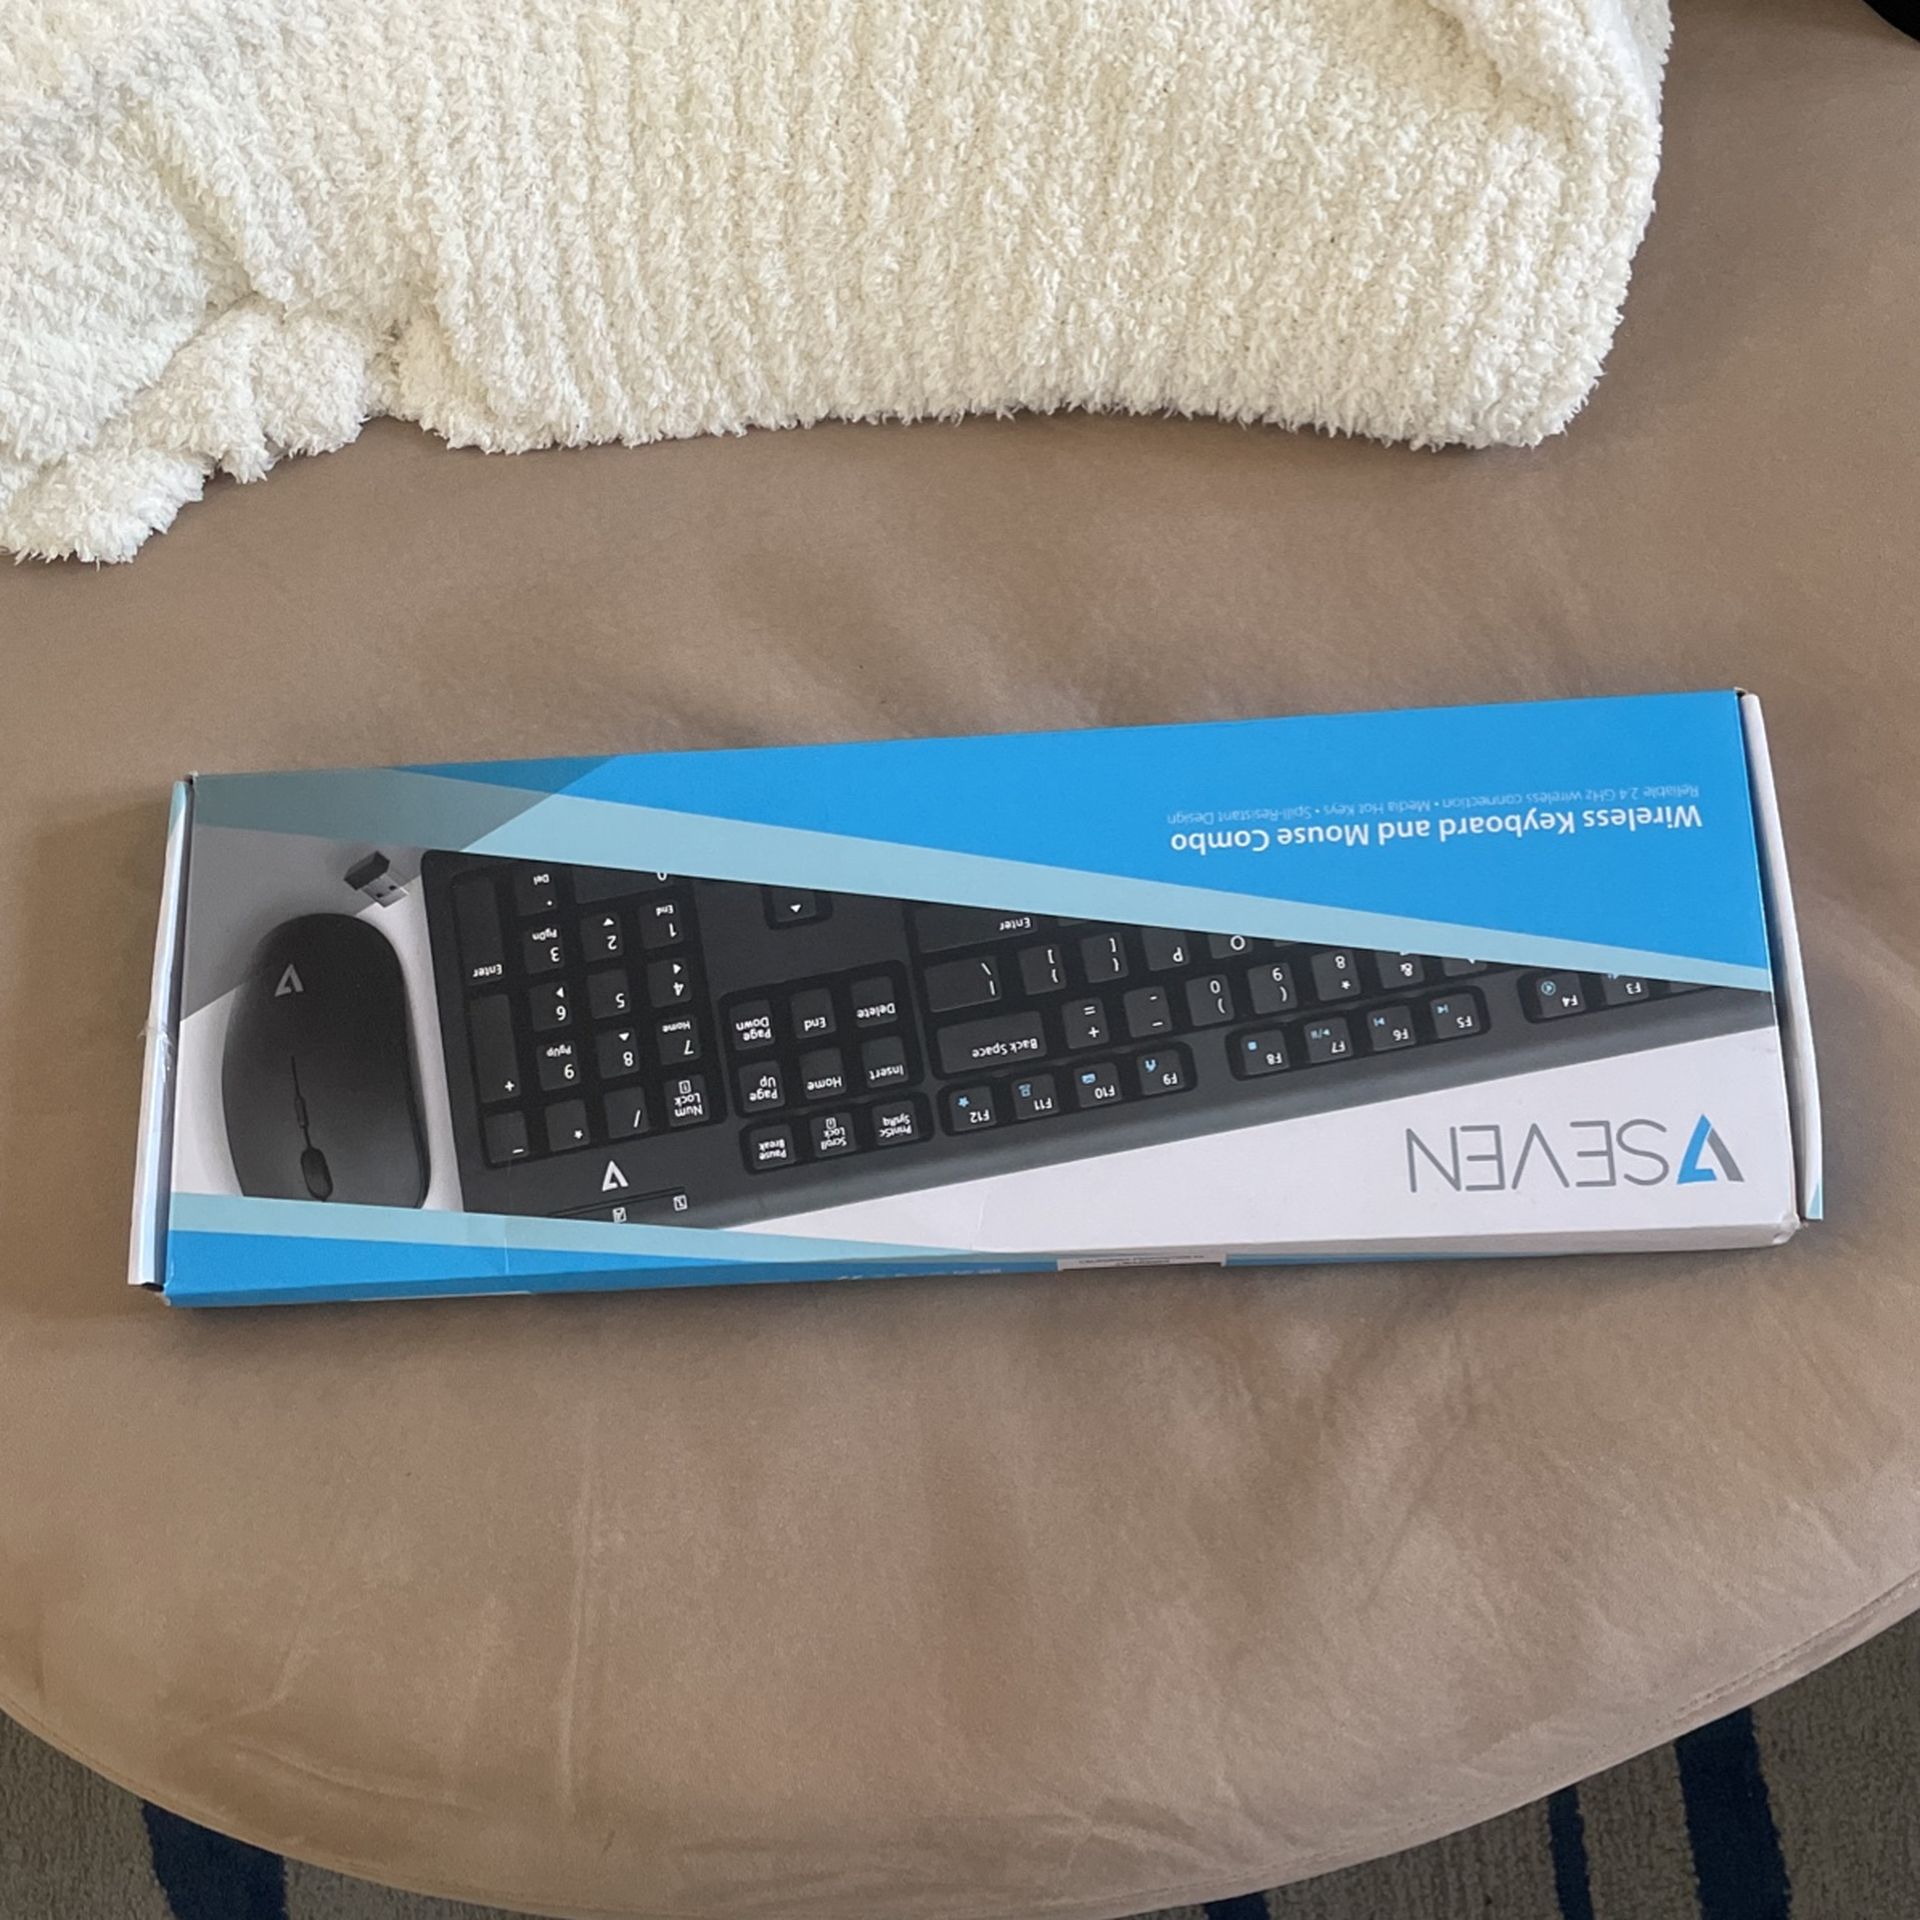 Wireless Keyboard and Mouse Combo 